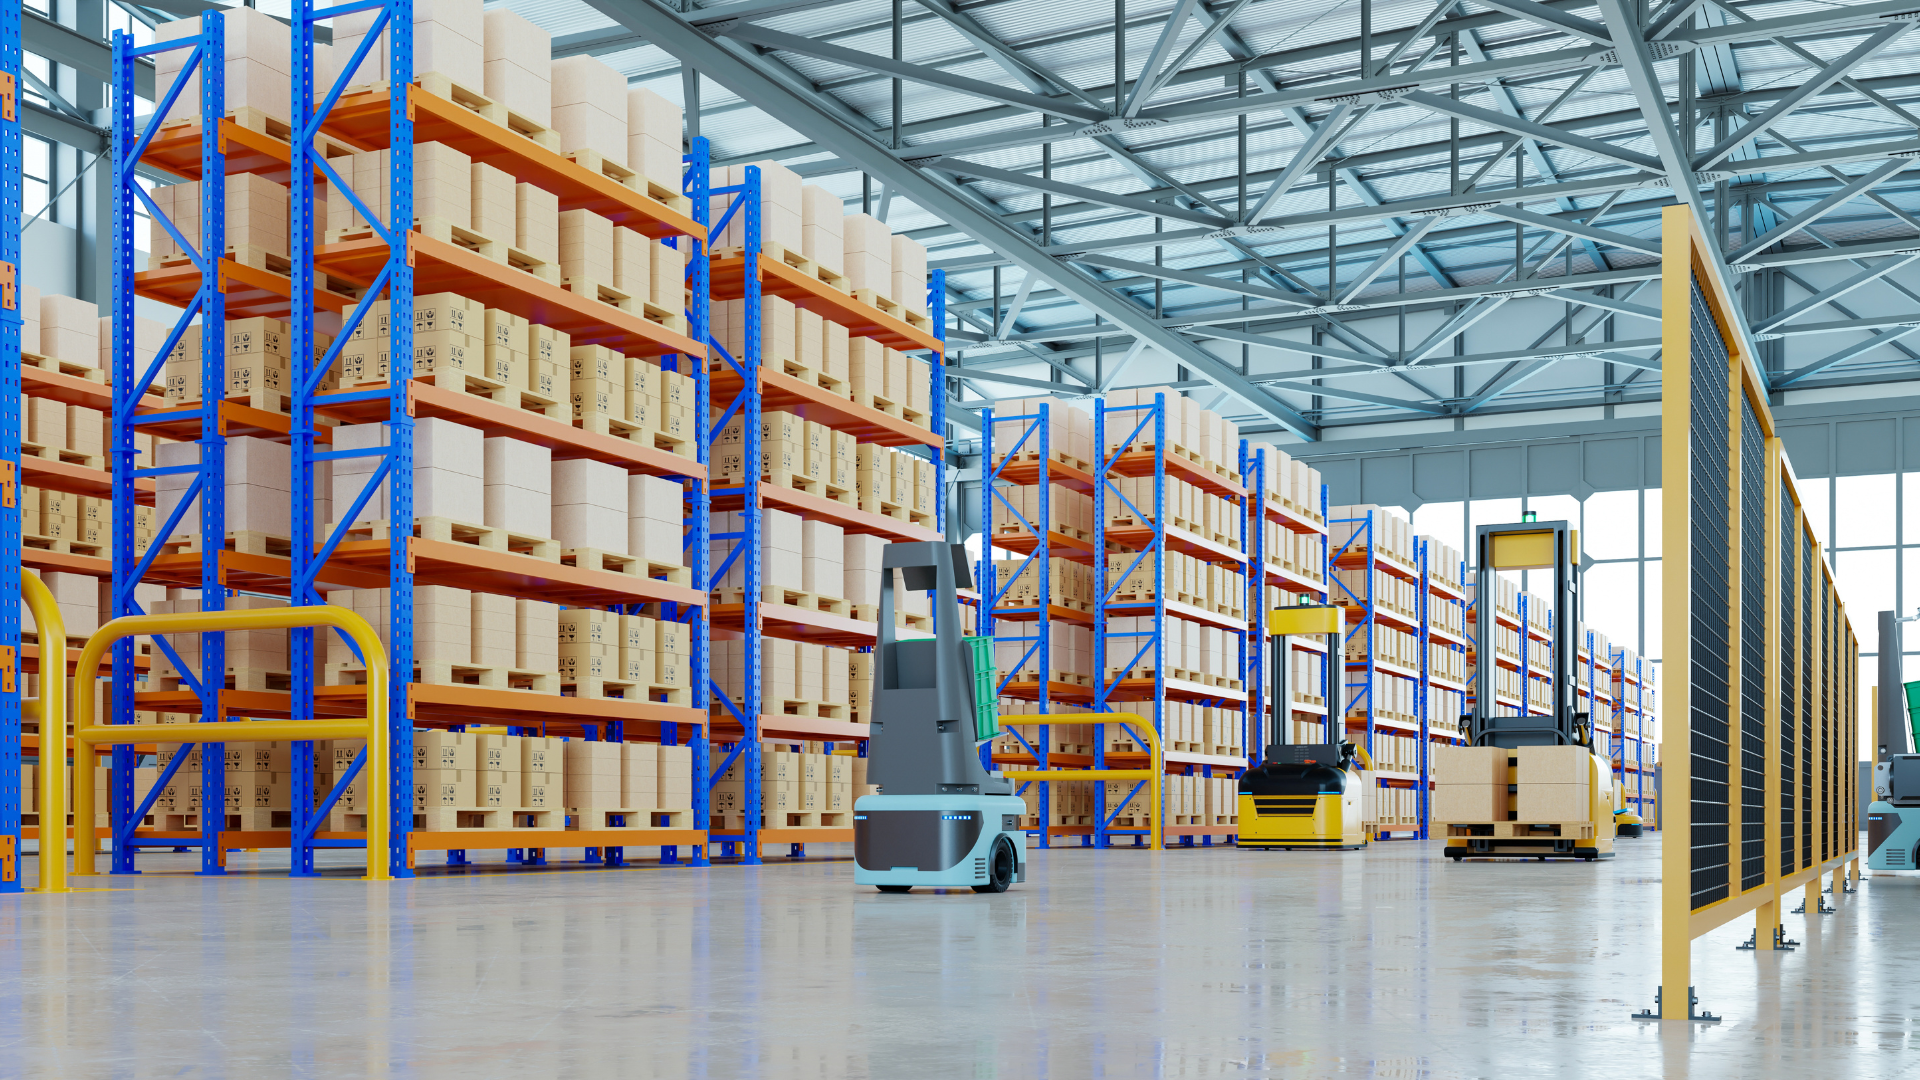 Efficient warehousing plays a vital role in fostering sustainable contract logistics, as it reduces energy usage, minimizes waste, optimizes transportation, and encourages environmentally responsible practices.